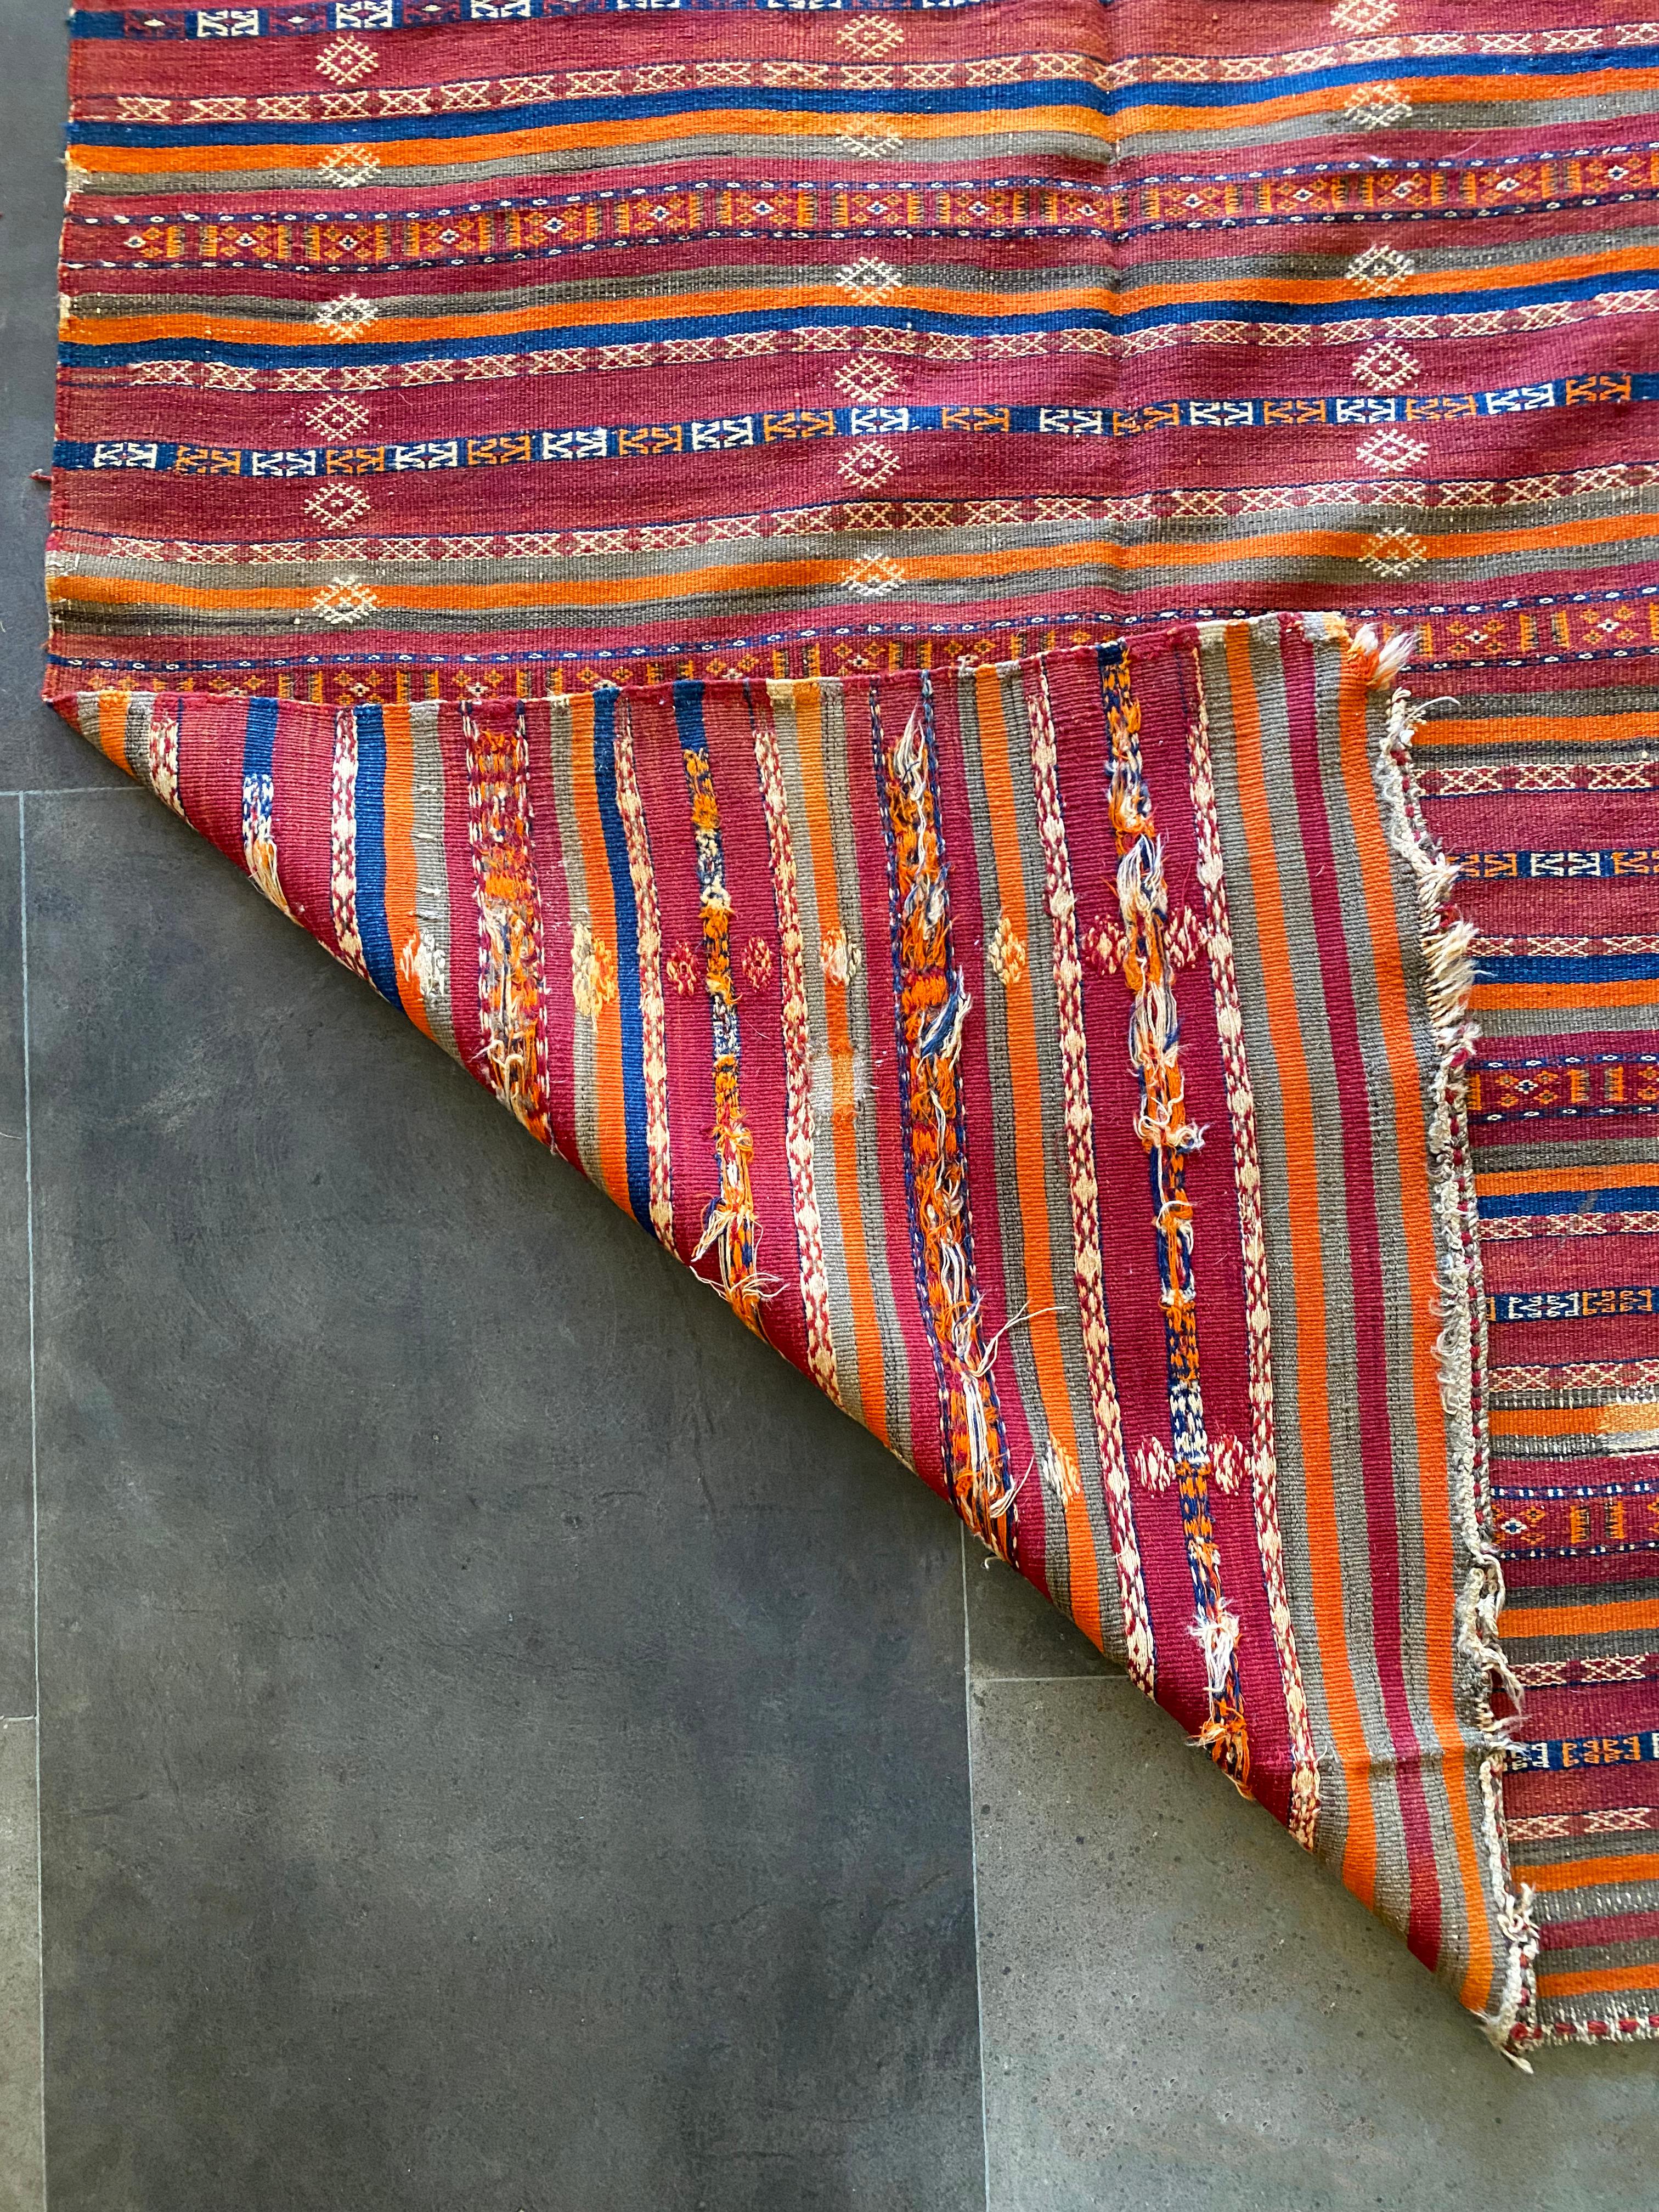 Antique Turkish Kilim Rug, Tribal Motifs, Striking Colour, Early 20th Century For Sale 2